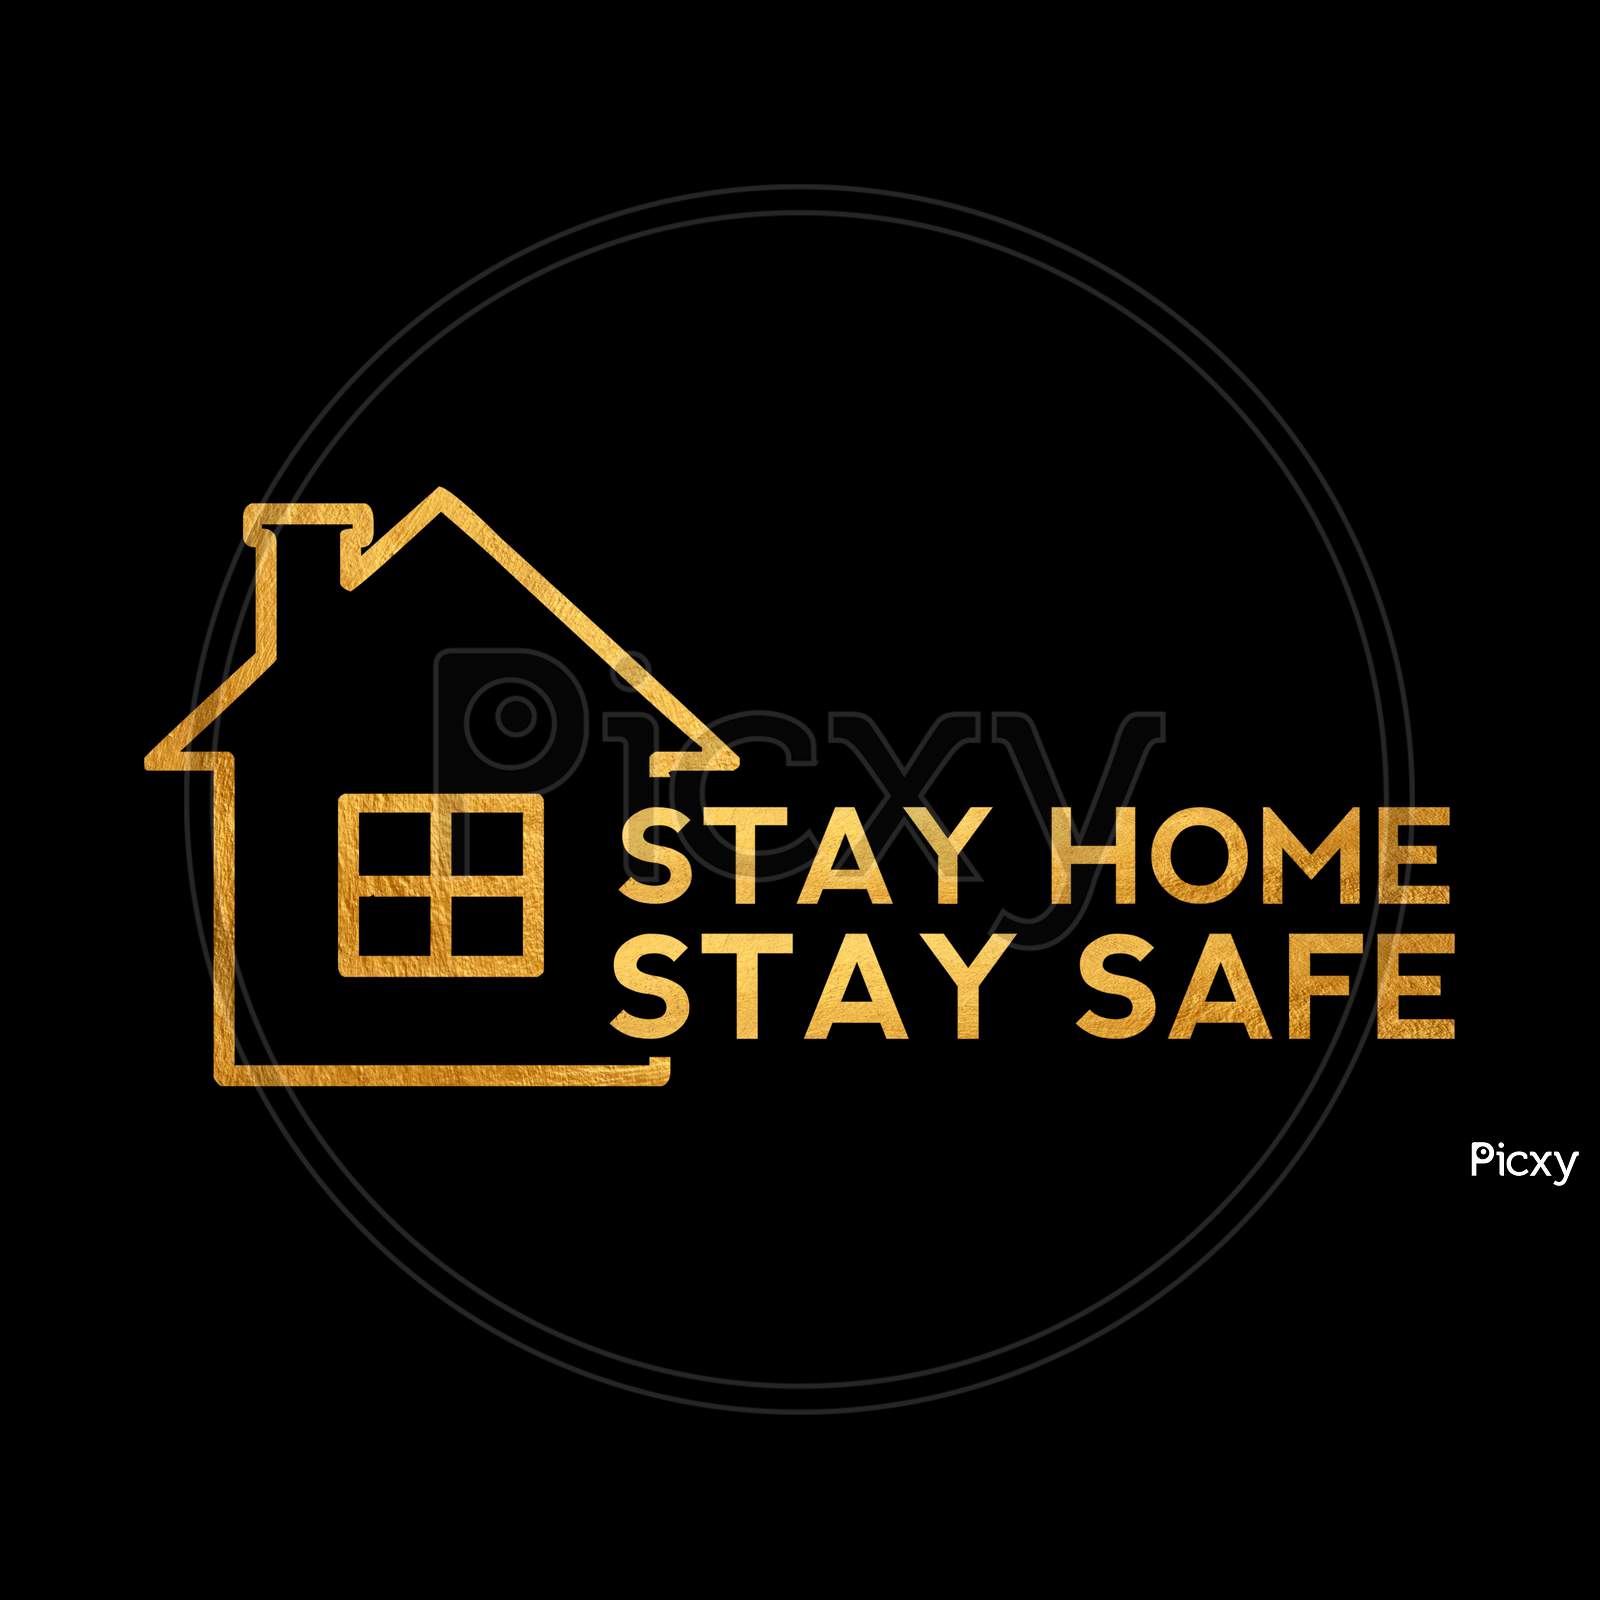 Stay Home Stay Safe (black background with golden color fonts)